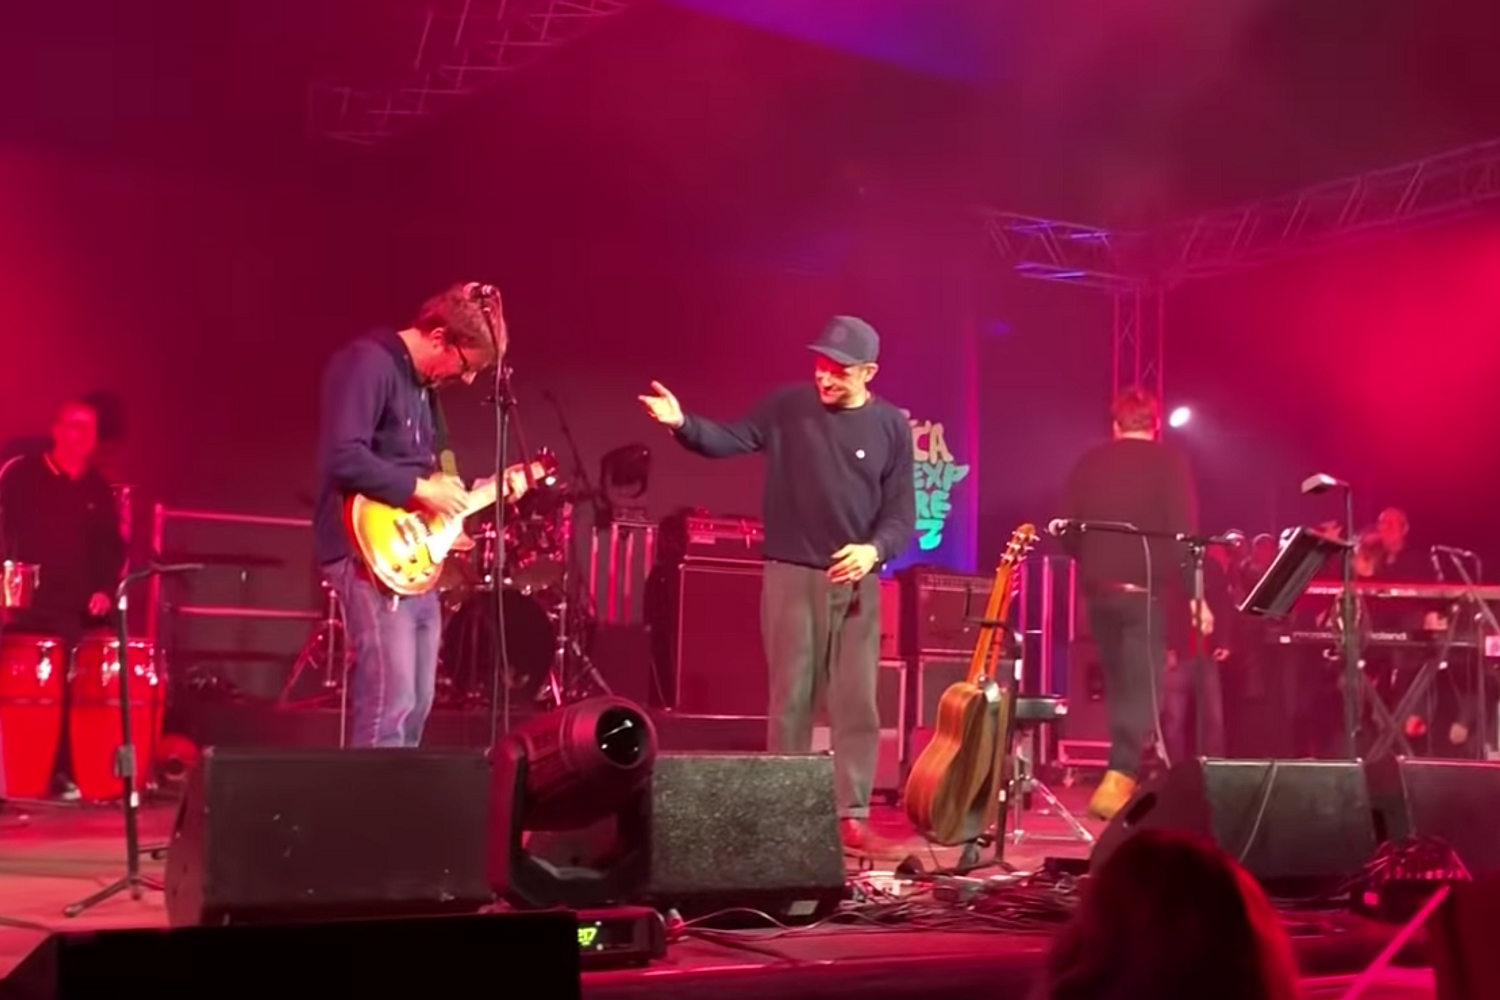 A surprise Blur reunion happened at the weekend…